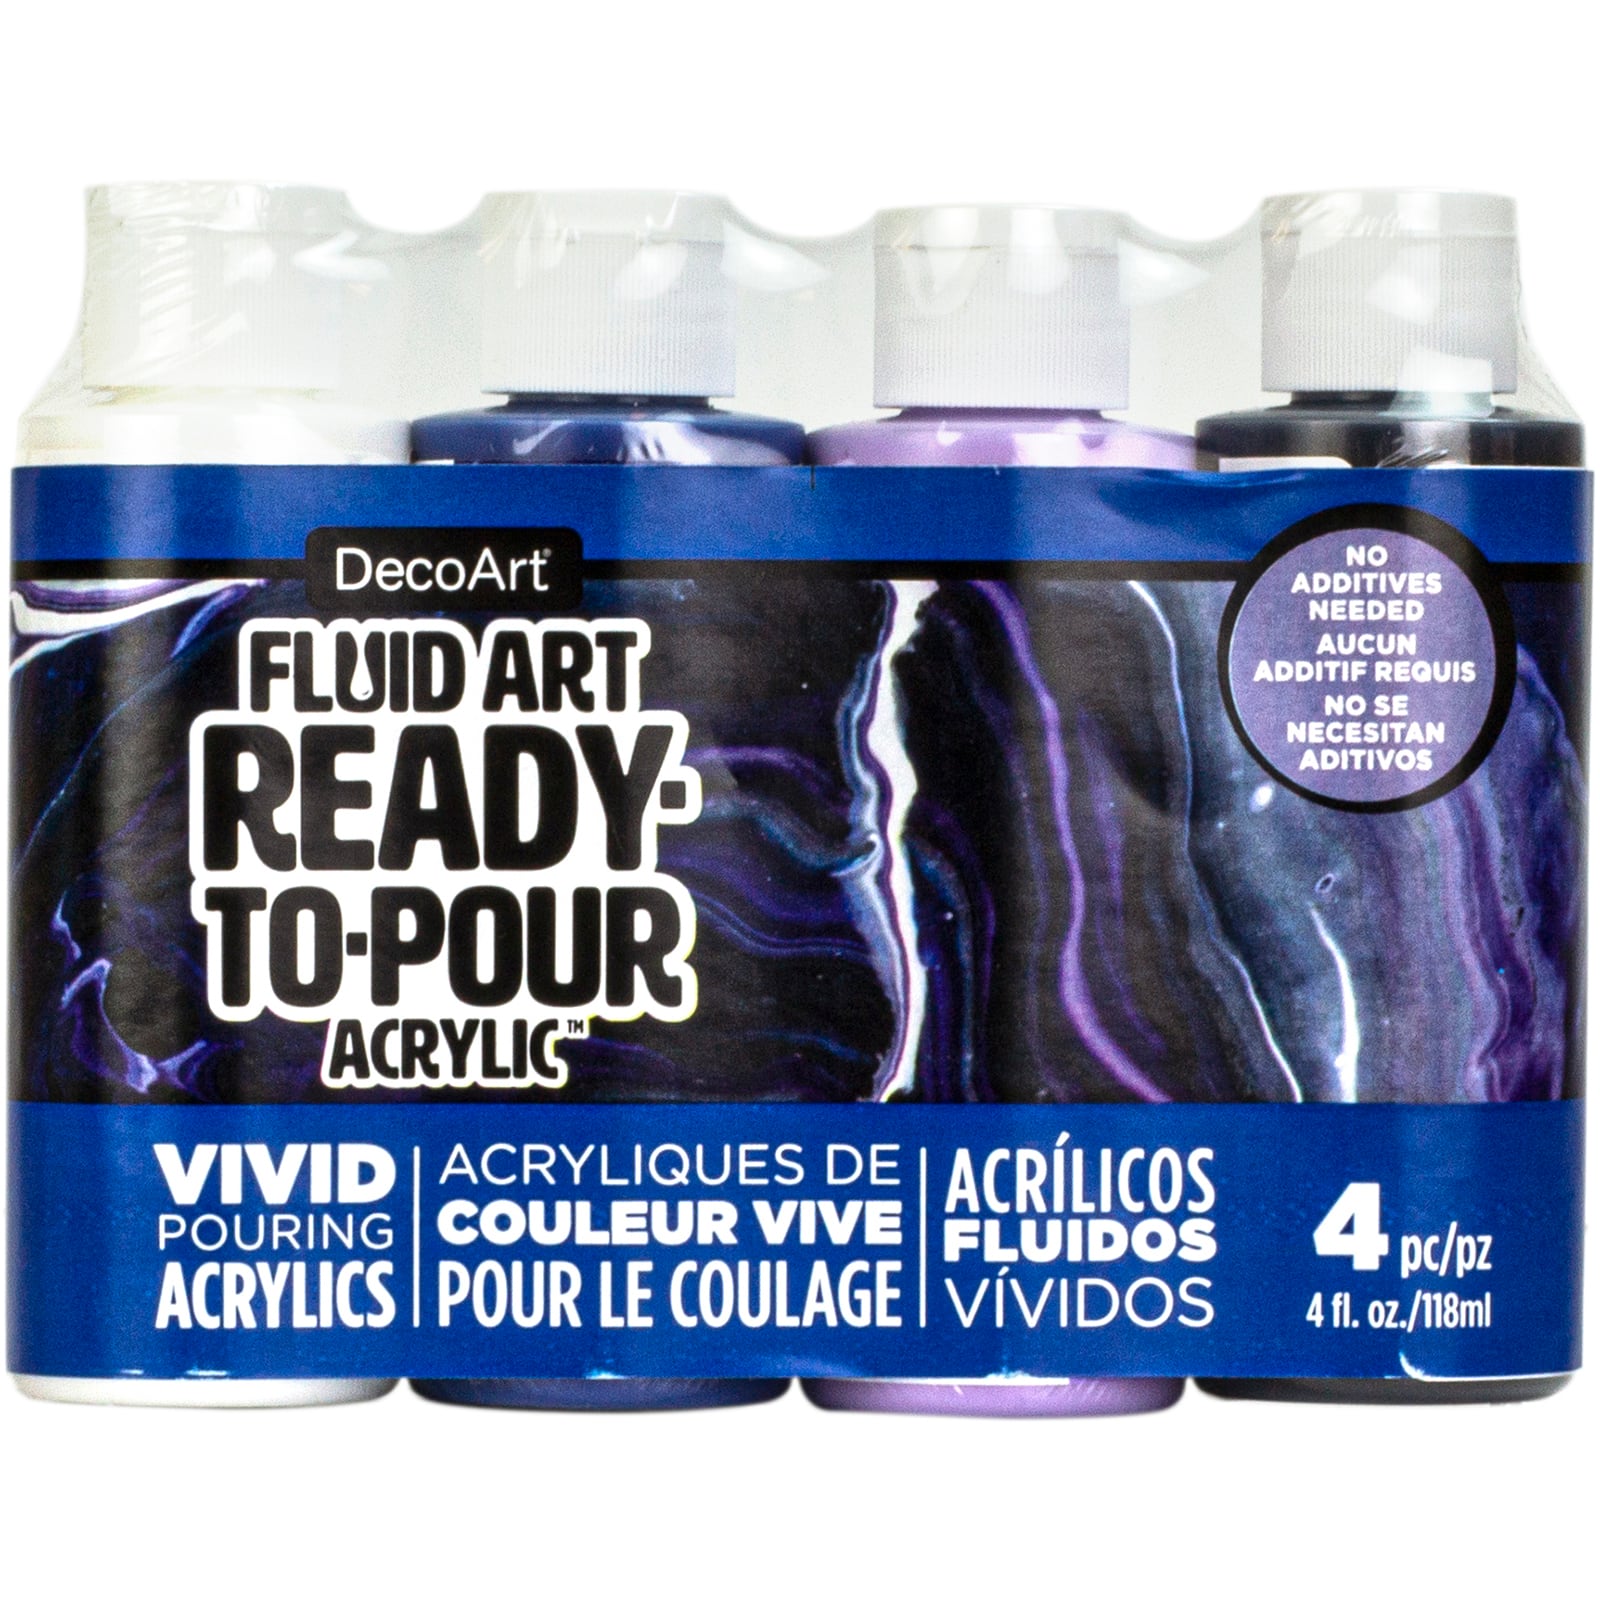 6 Packs: 4 ct. (24 total) DecoArt&#xAE; Fluid Art Ready-to-Pour Acrylic&#x2122; Galactic